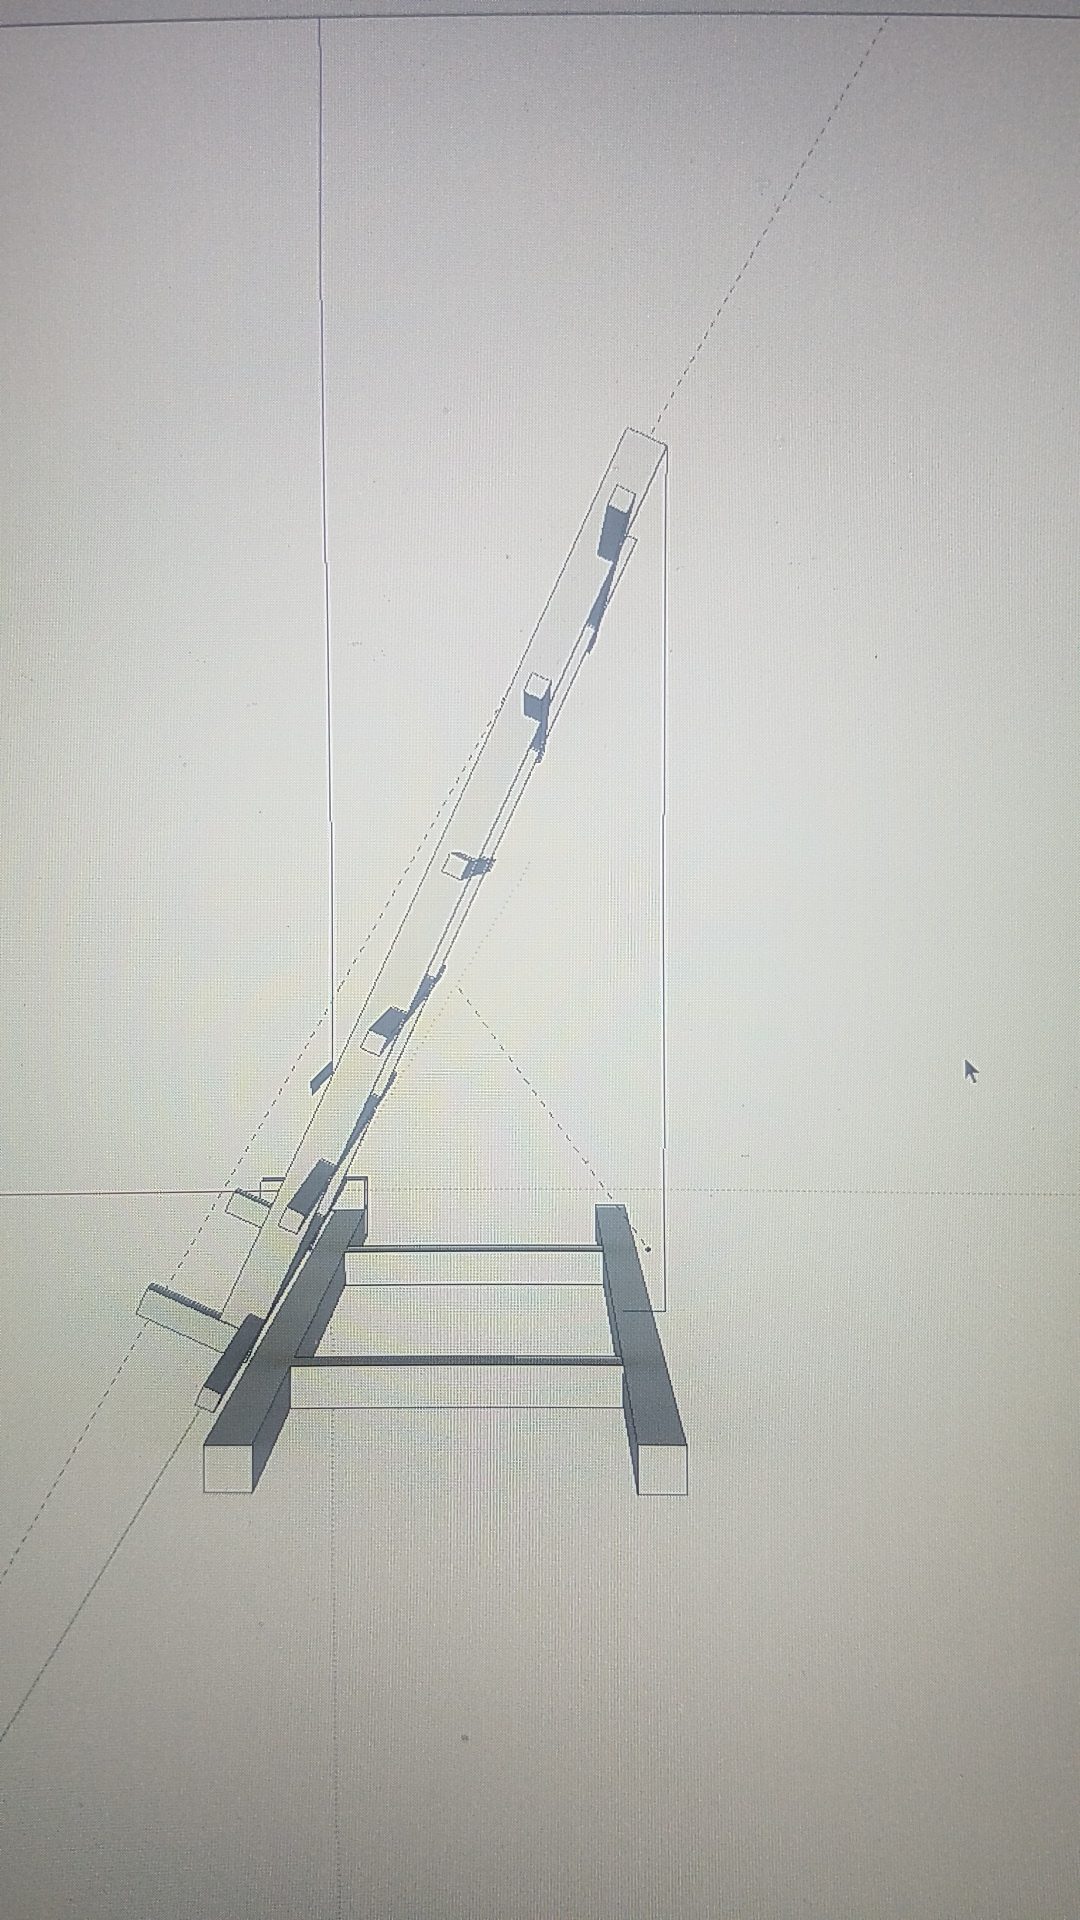 The preliminary AutoCAD design for a customized steel cart.